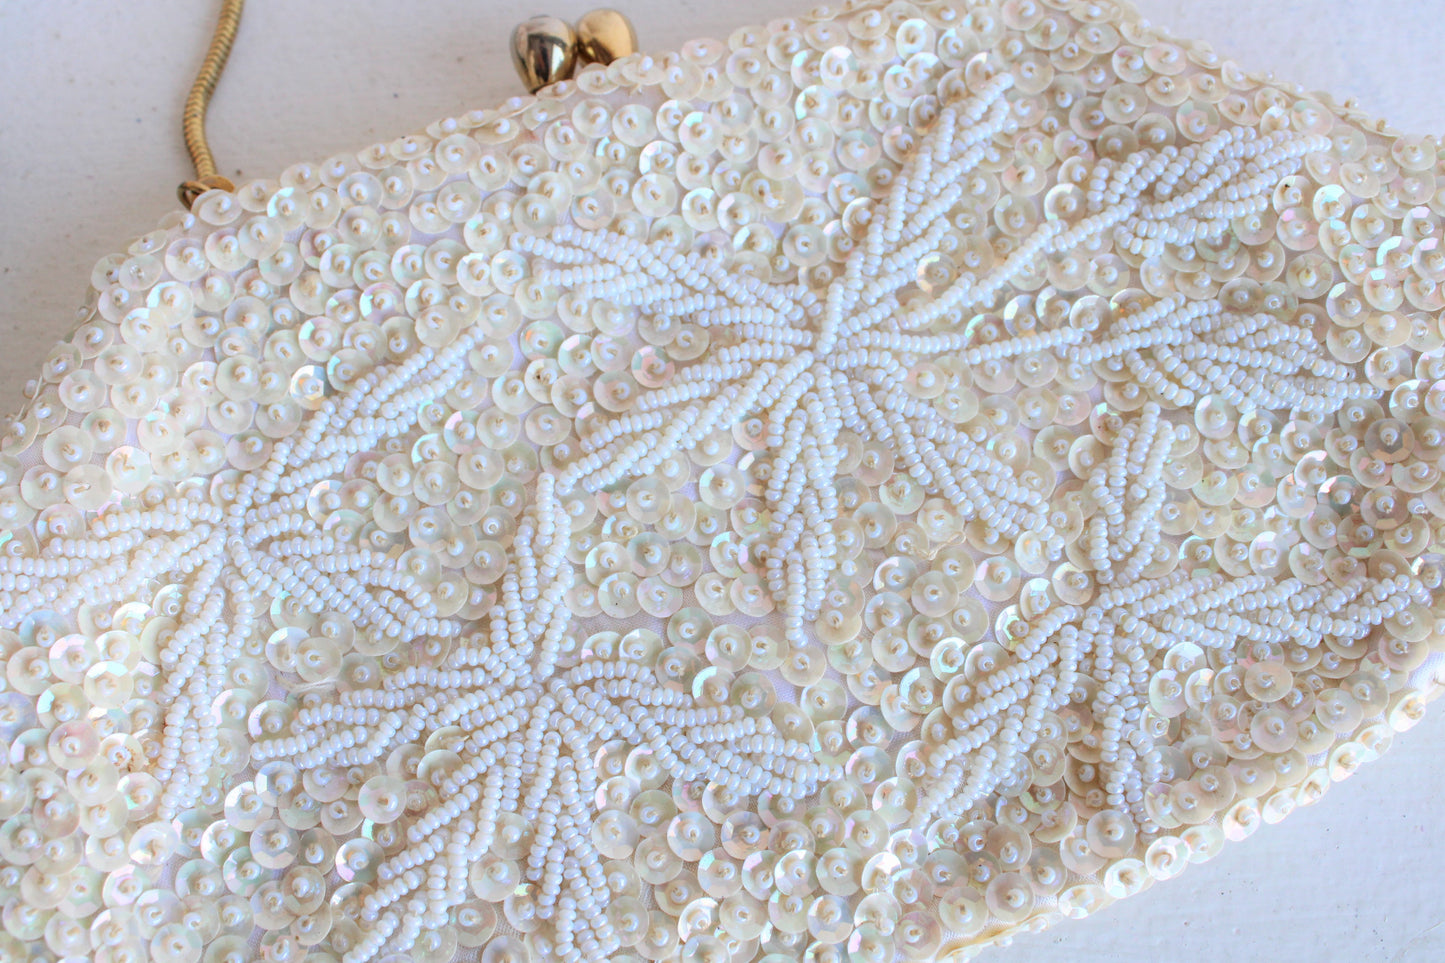 Vintage 1960s Beaded and Sequined Clutch Bag